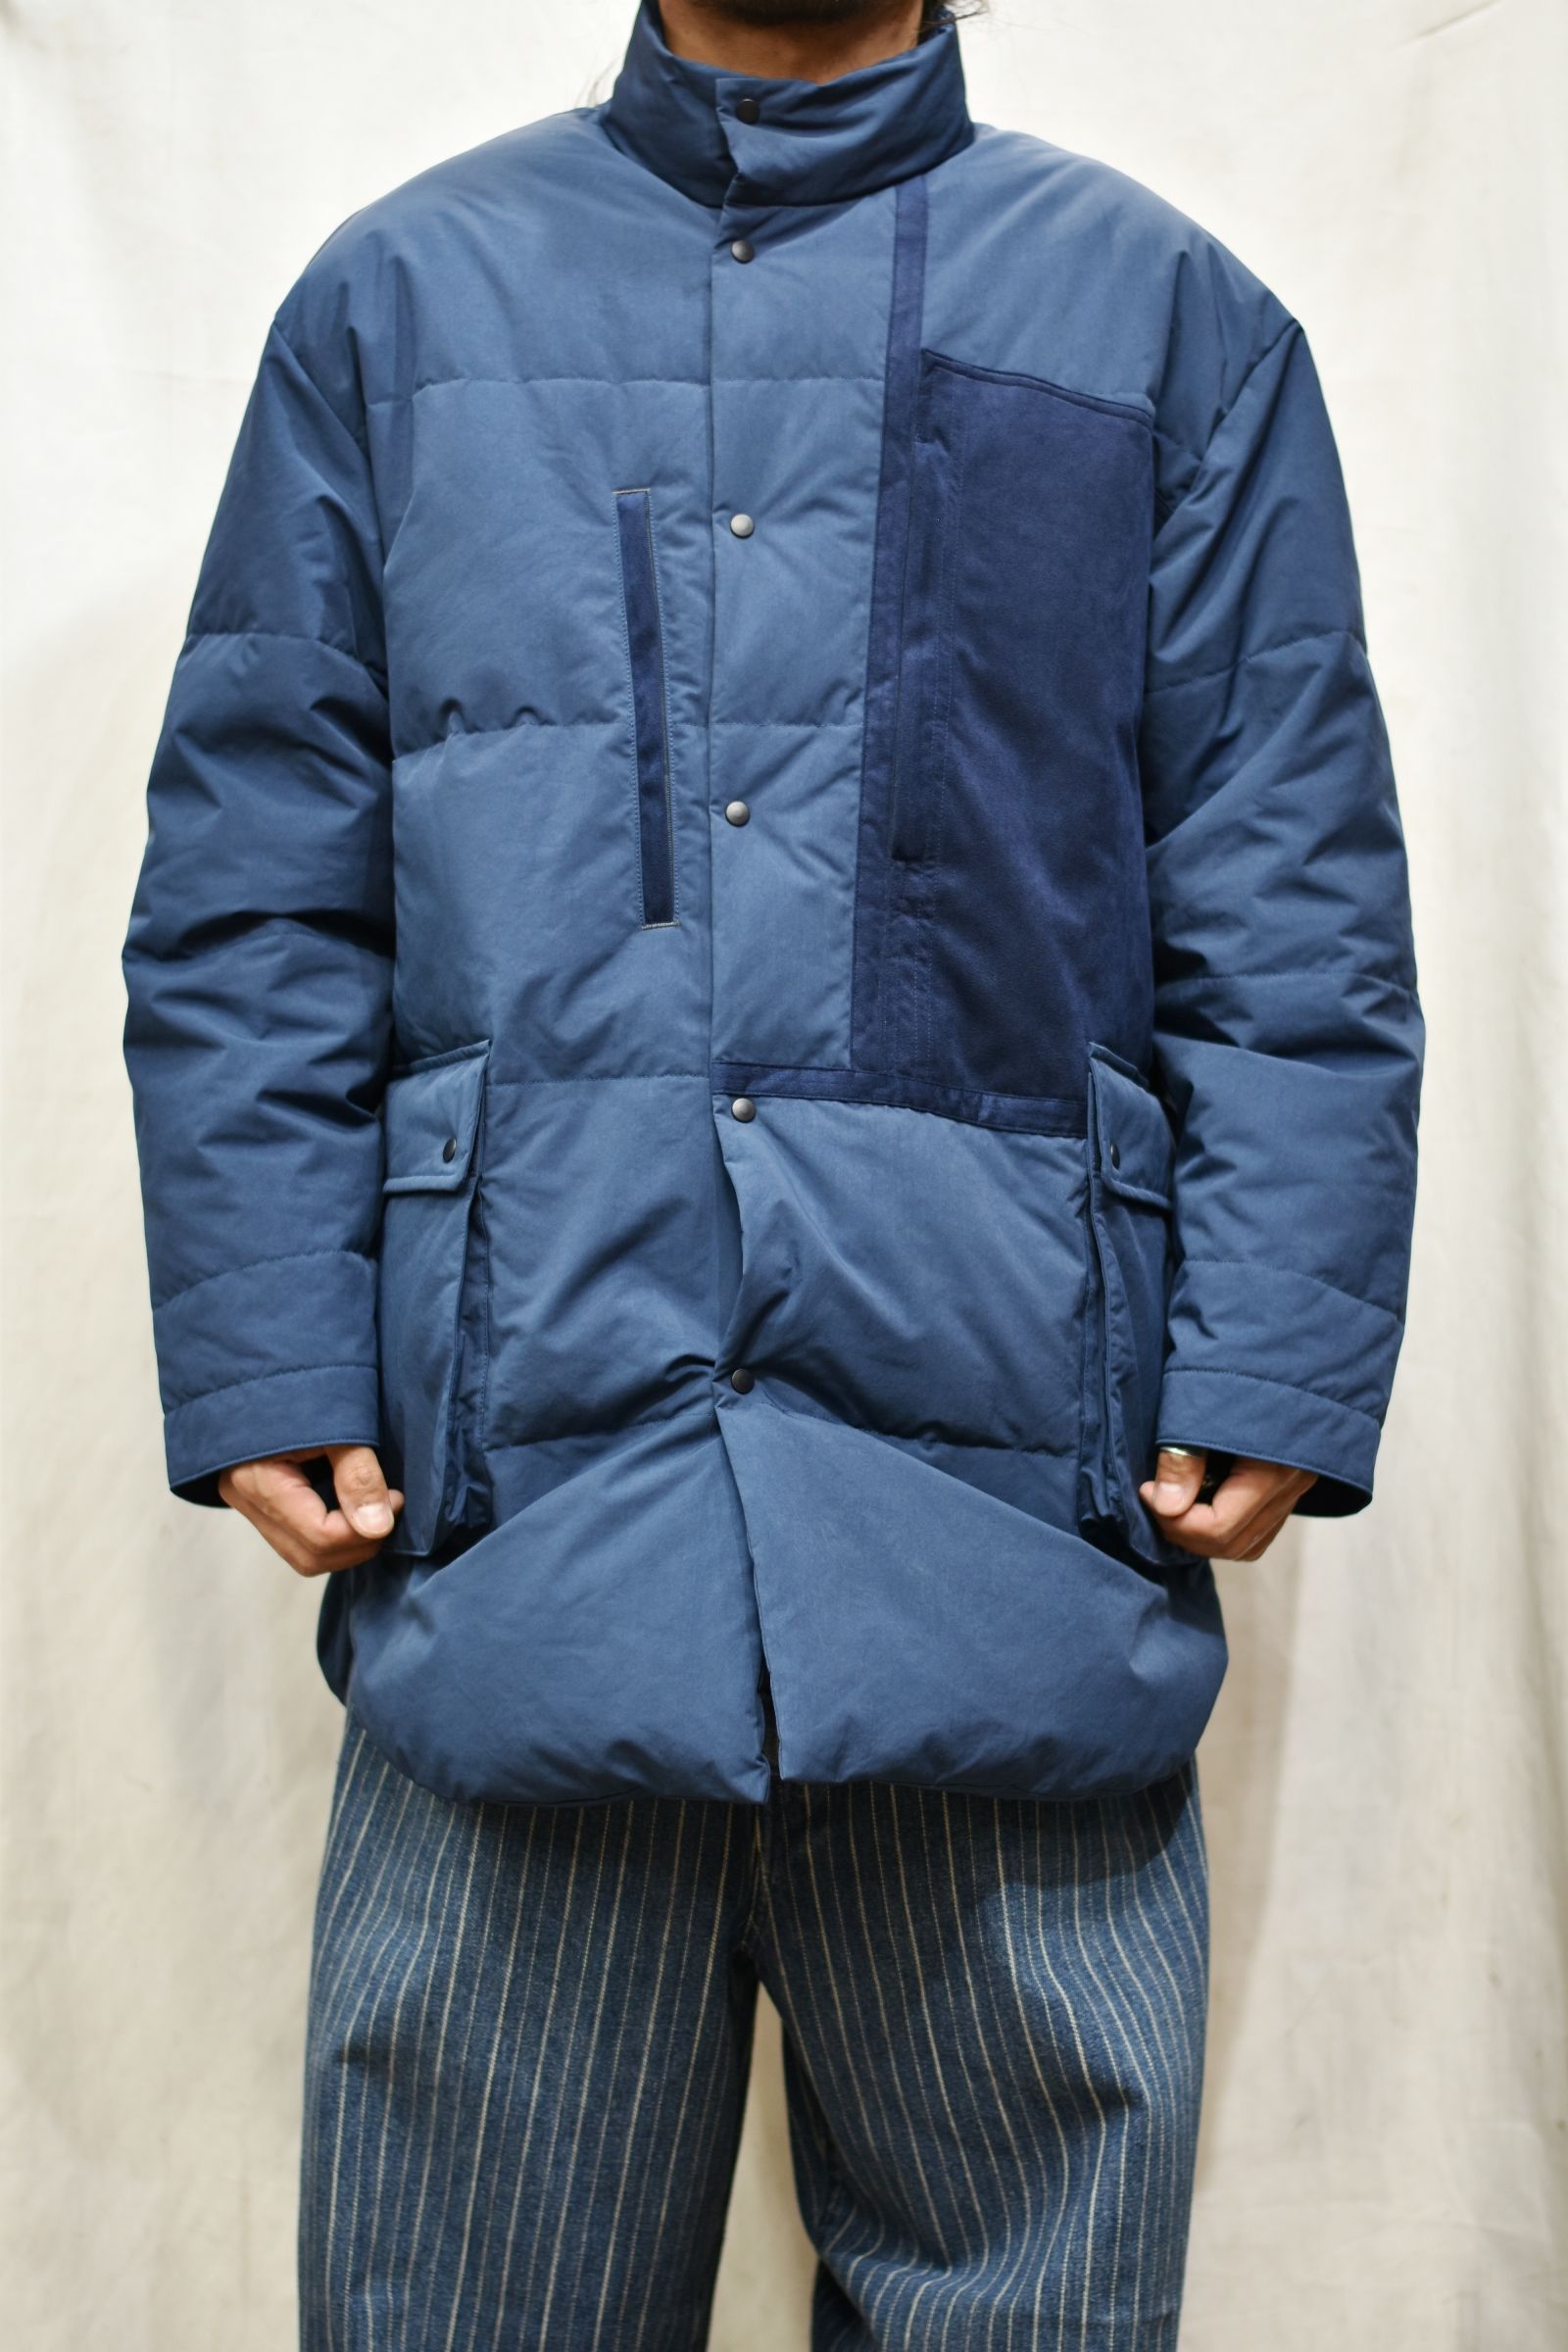 Porter Classic - WEATHER DOWN SHIRT JACKET -NAVY- | chord